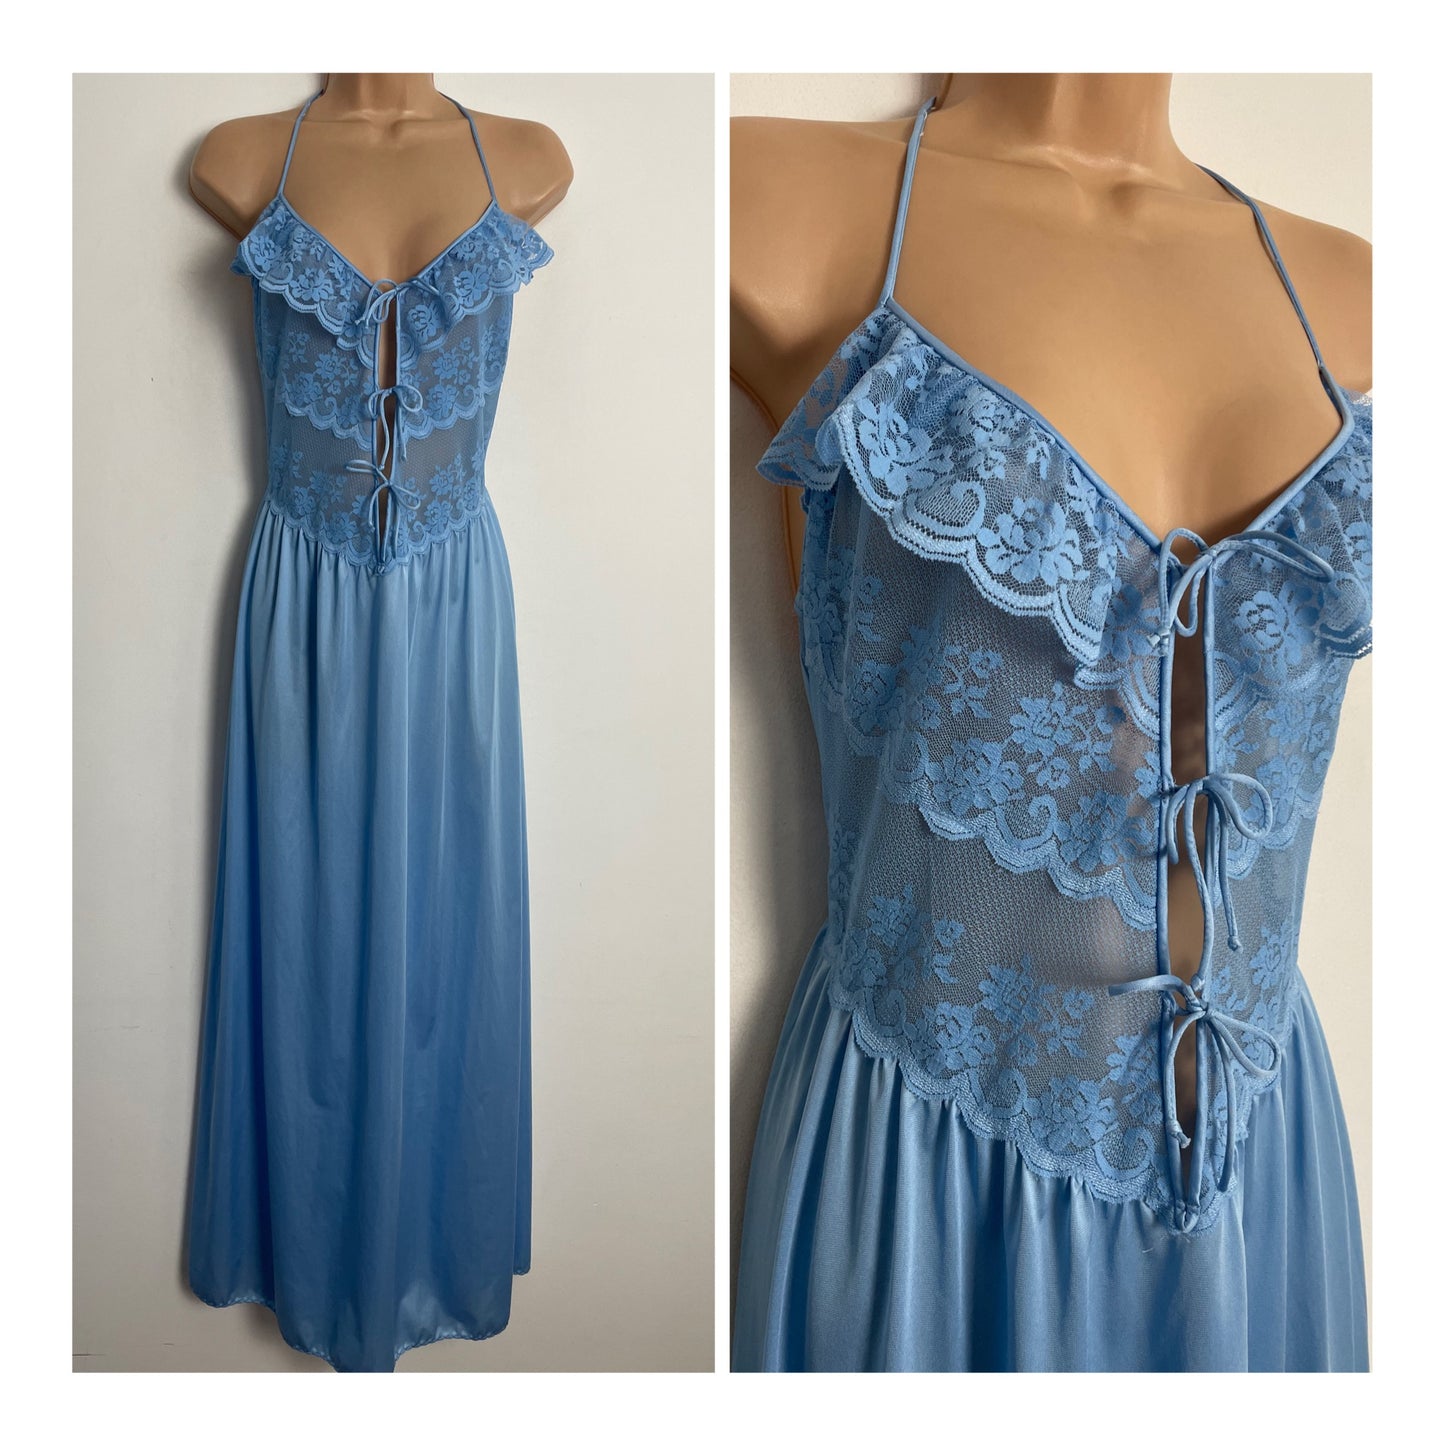 Vintage 1970s UK Size 12-14 Pretty Dusky Blue Lace Halter Strap Three Tie Fonted Negligee Nightgown